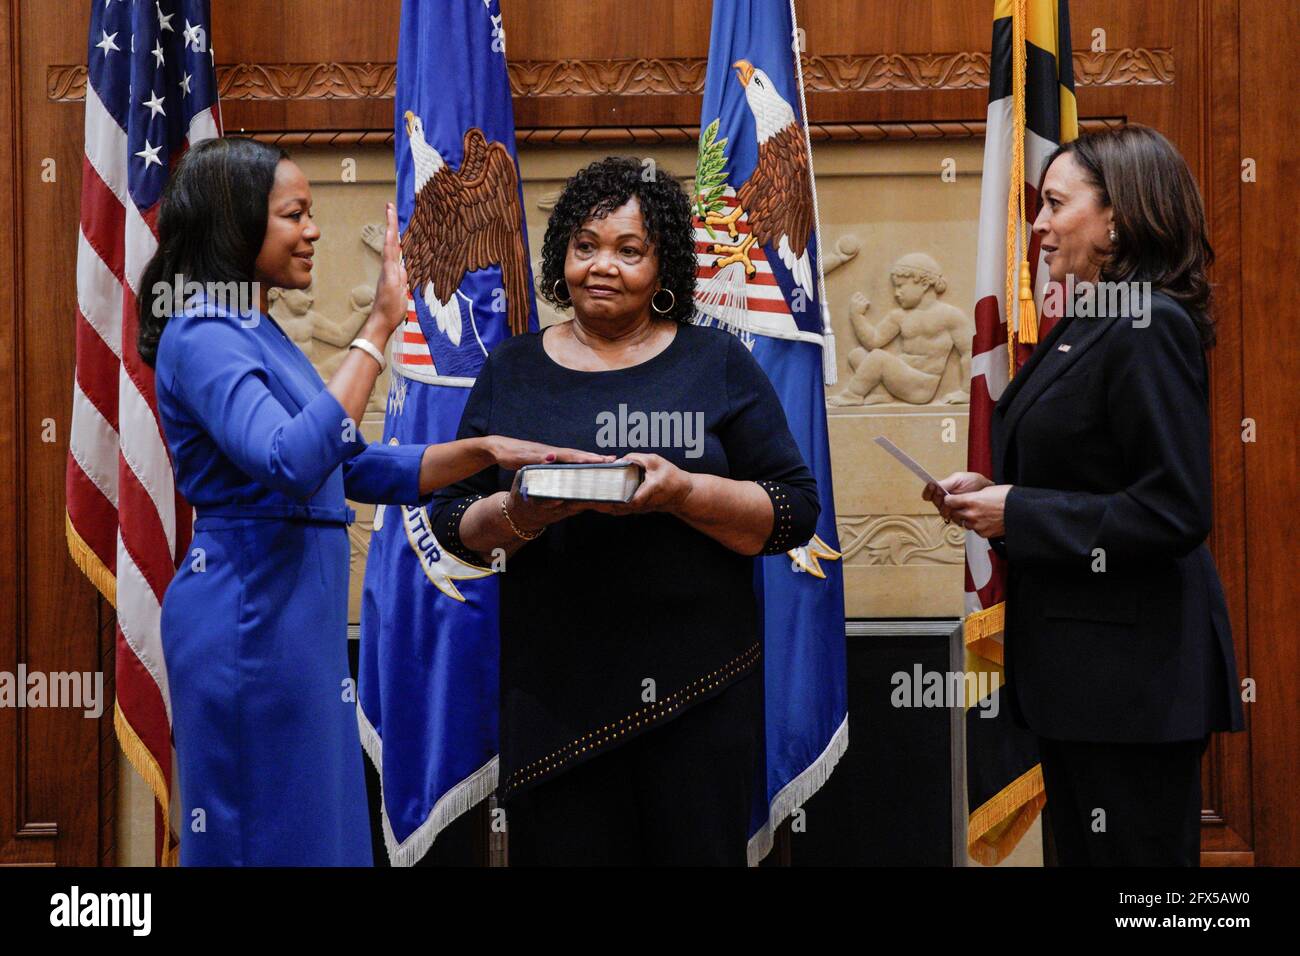 U.S. Vice President Kamala Harris ceremonially swears in Kristen Clarke as Assistant Attorney General for the Civil Rights Division, alongside Kristen's mother Pansy Clarke (C), at the Department of Justice in Washington, U.S., May 25, 2021. REUTERS/Yuri Gripas Stock Photo